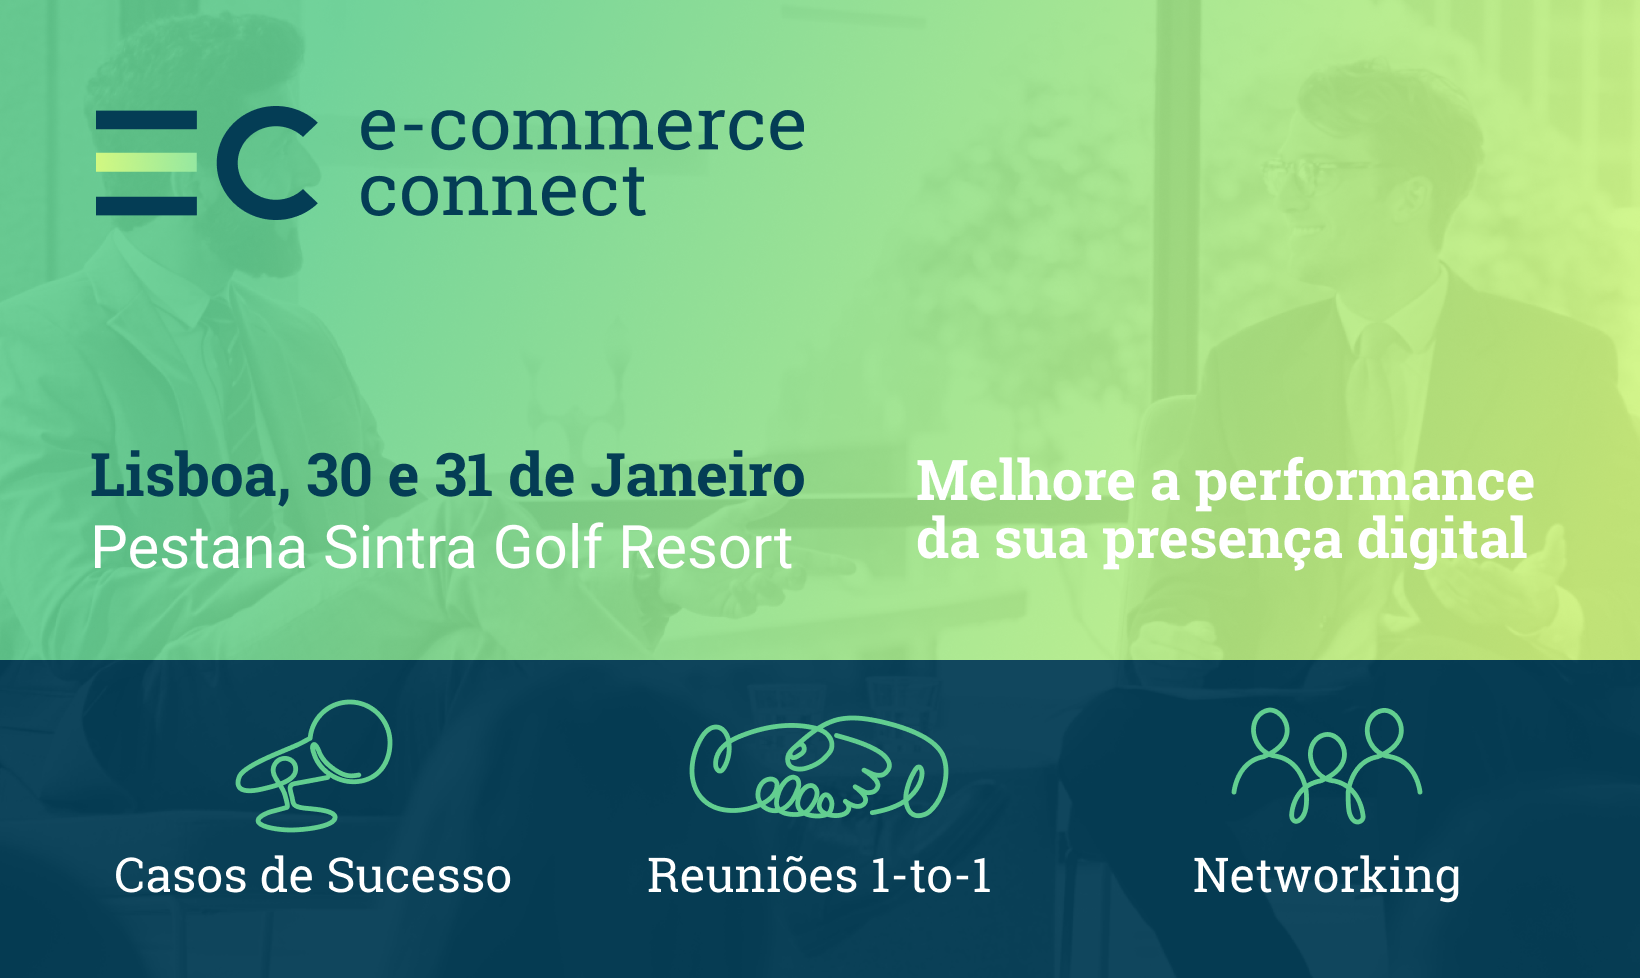 econnect - Ecommerce Connect